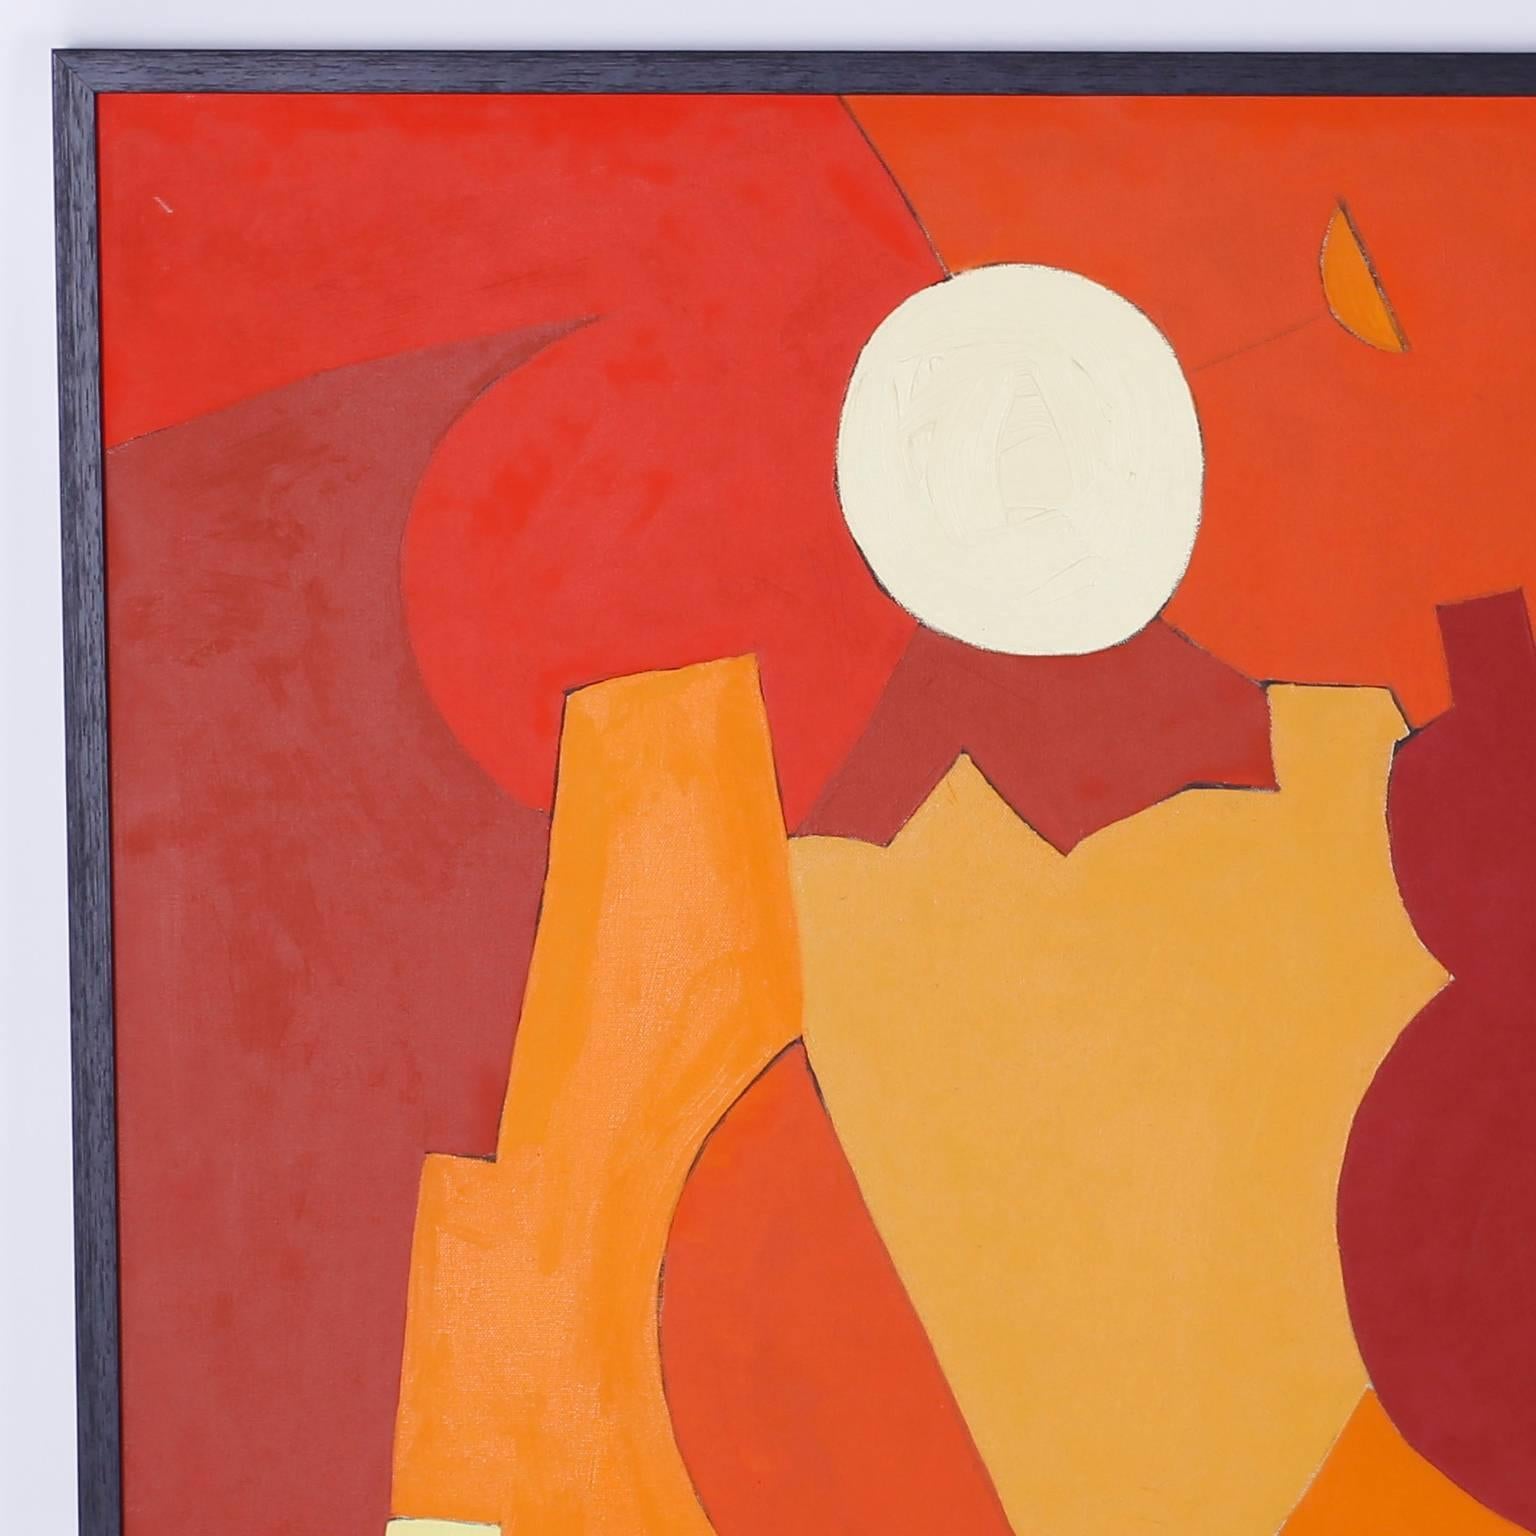 Abstract oil painting on canvas that expresses itself with familiar
shapes in a striking, provocative palette. Signed and dated 1967 by the
noted artist Arnold Weber in the lower left.